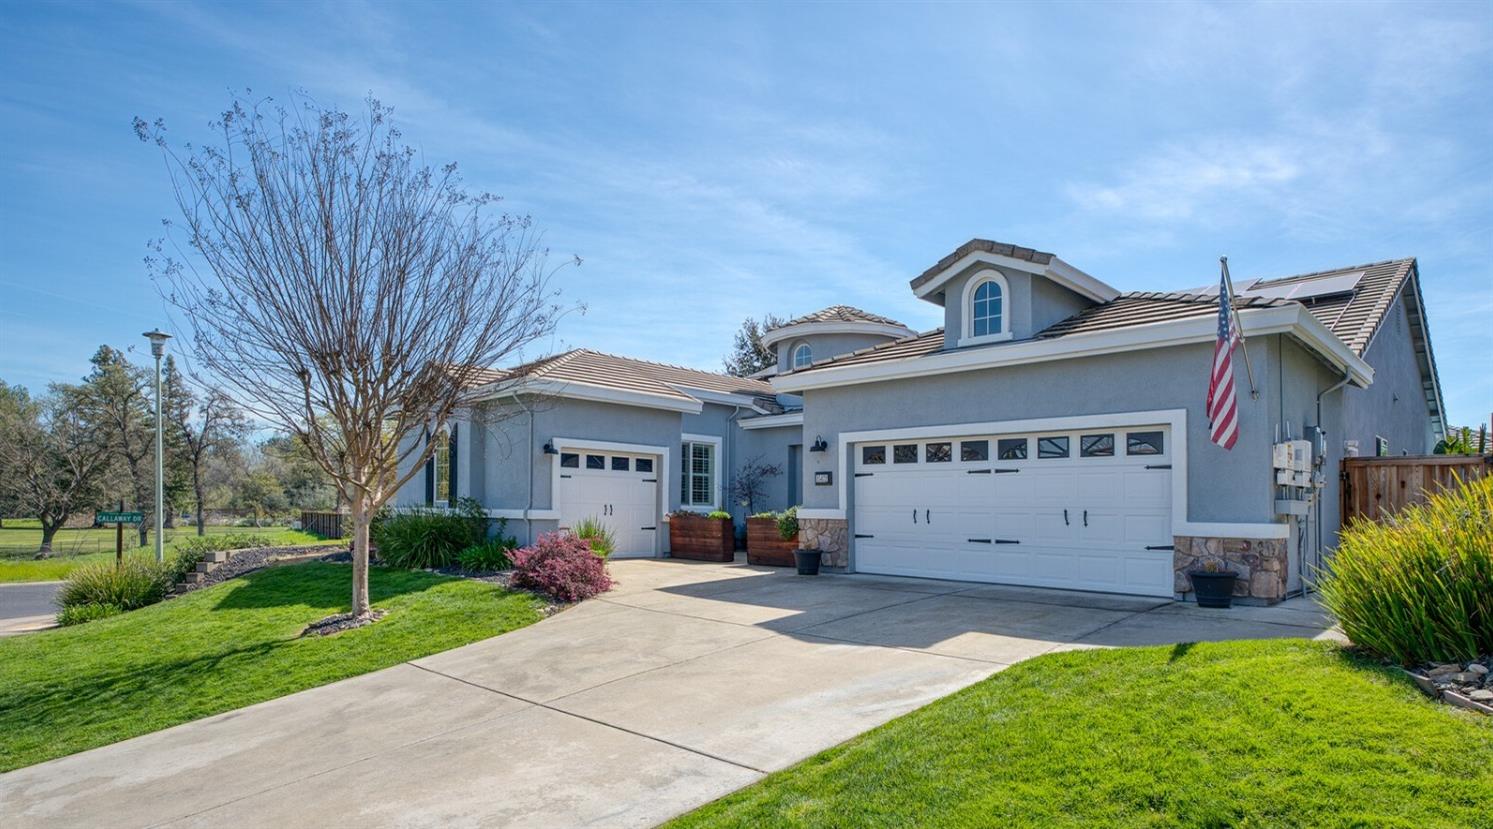 Photo of 15472 Feathery Ct in Rancho Murieta, CA